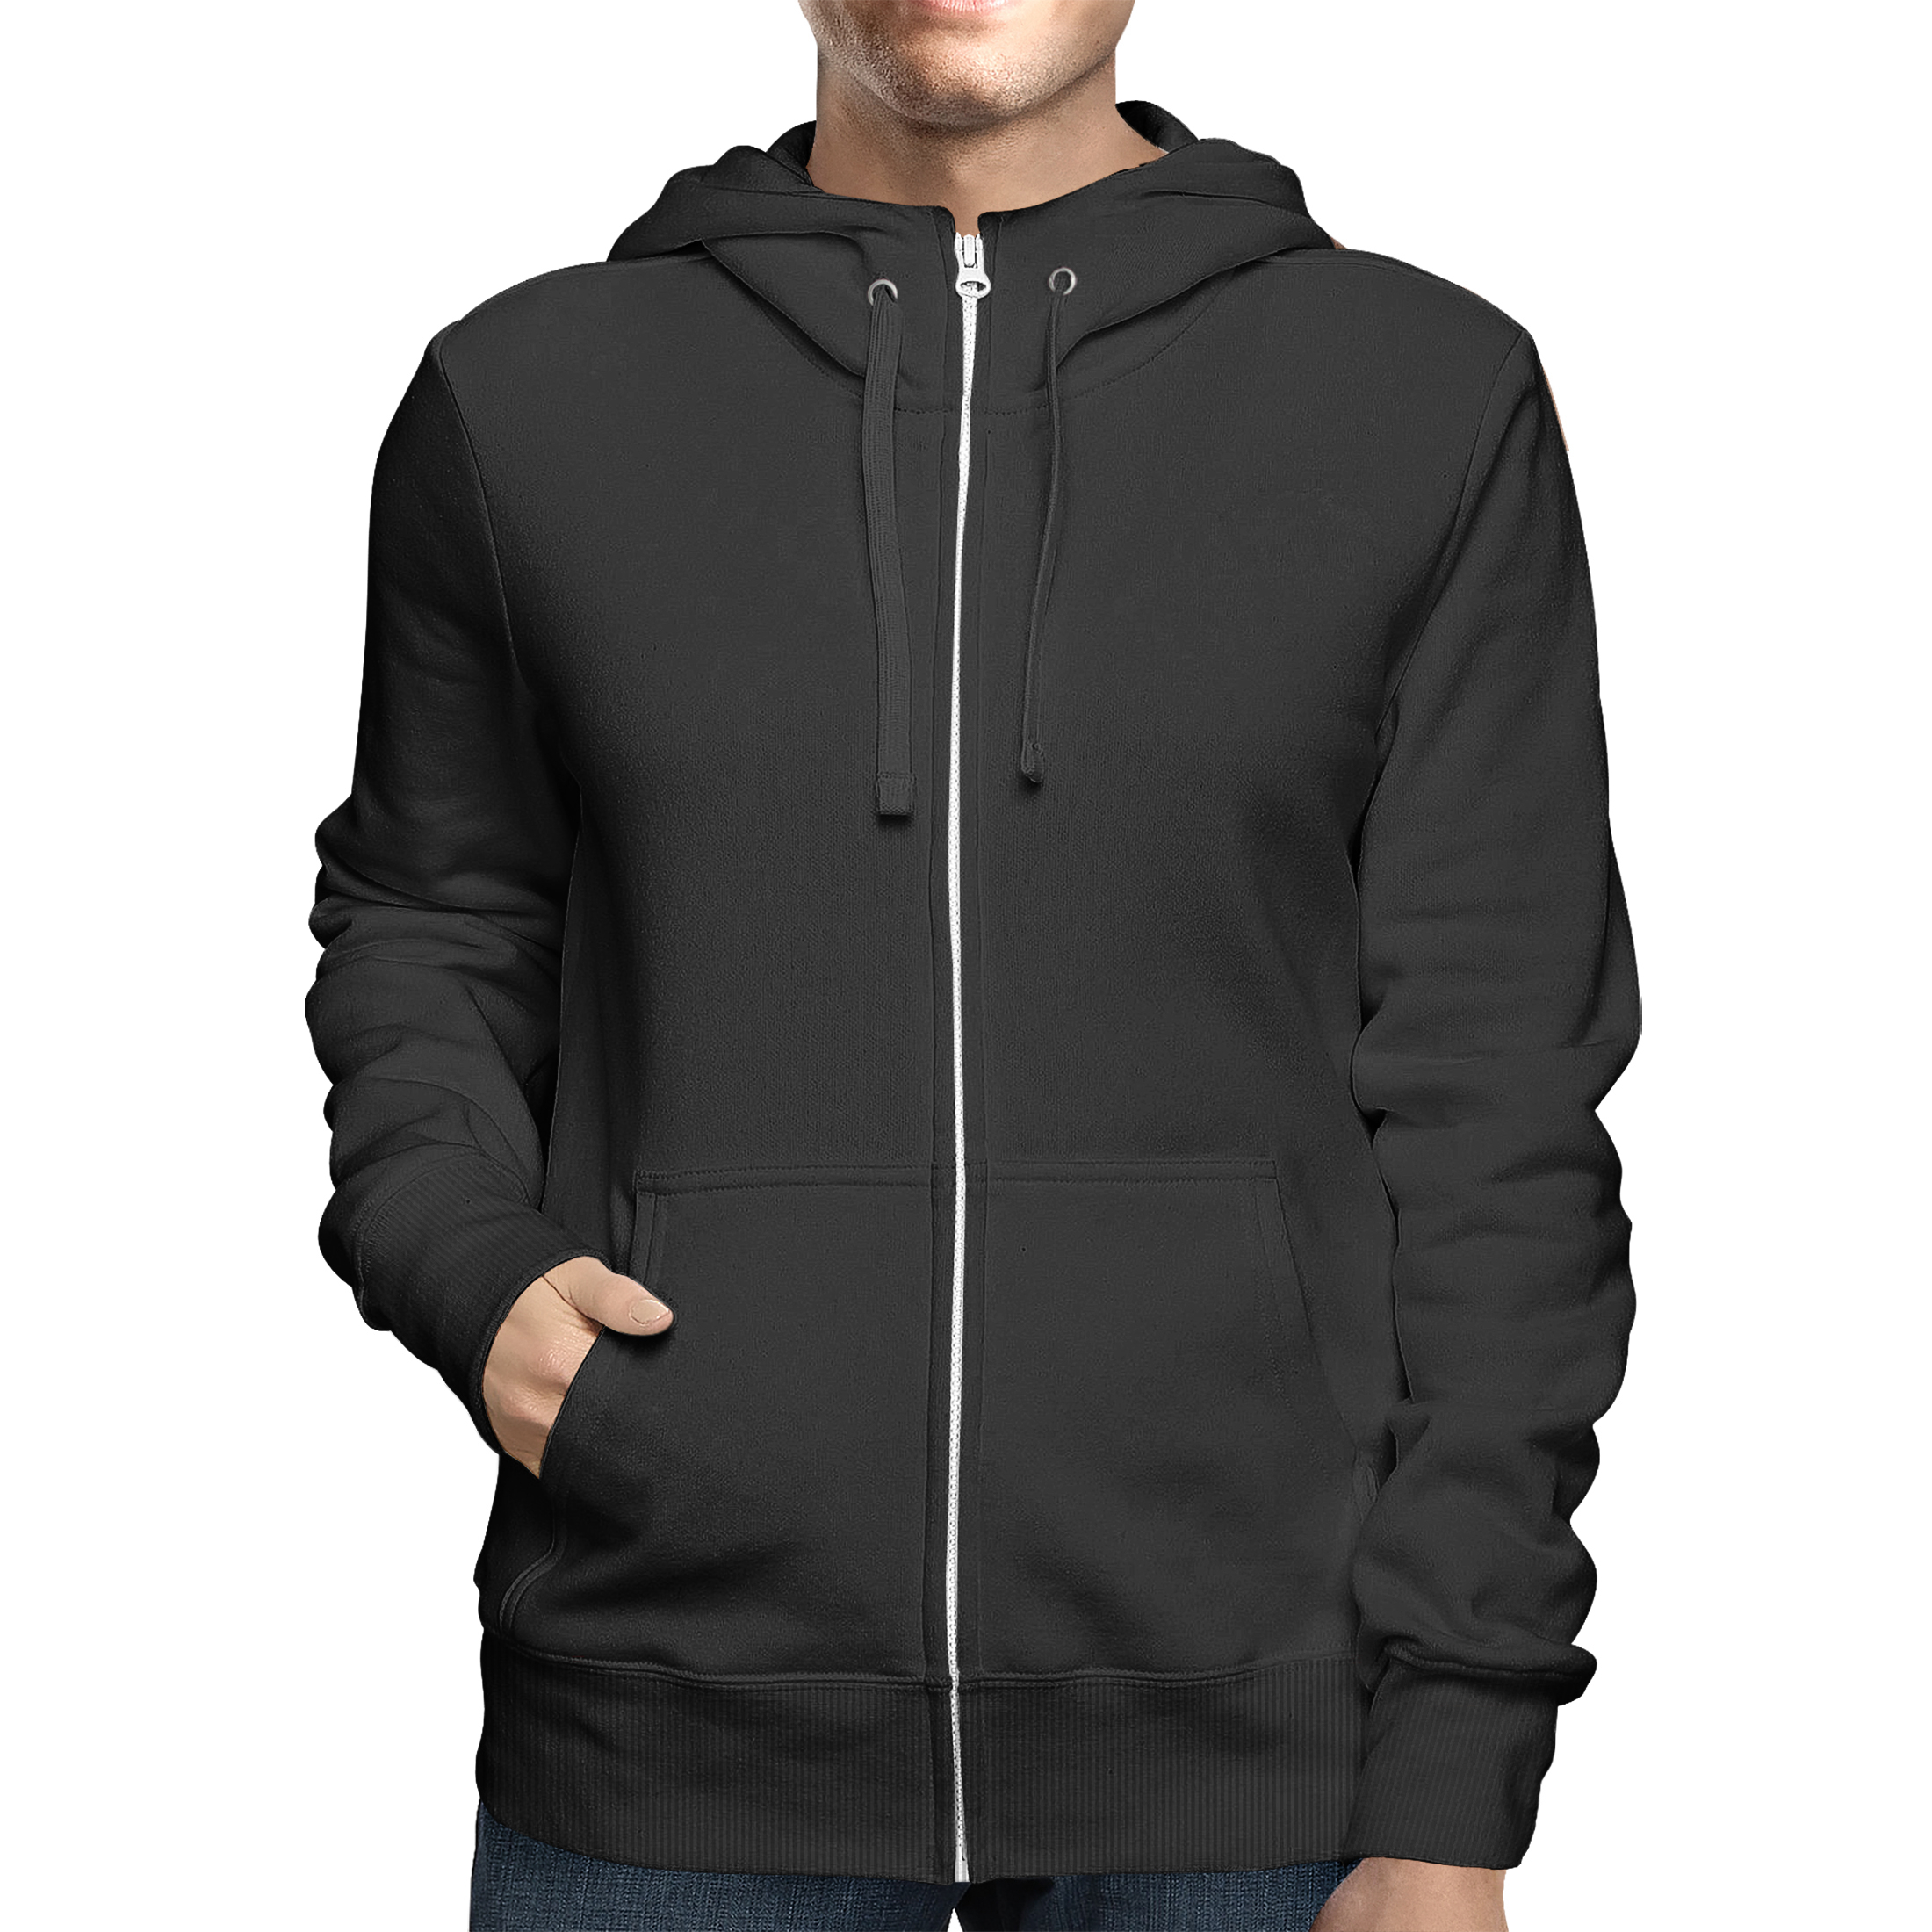 2-Pack: Men's Full Zip Up Fleece-Lined Hoodie Sweatshirt (Big & Tall Size Available) - Black, X-large